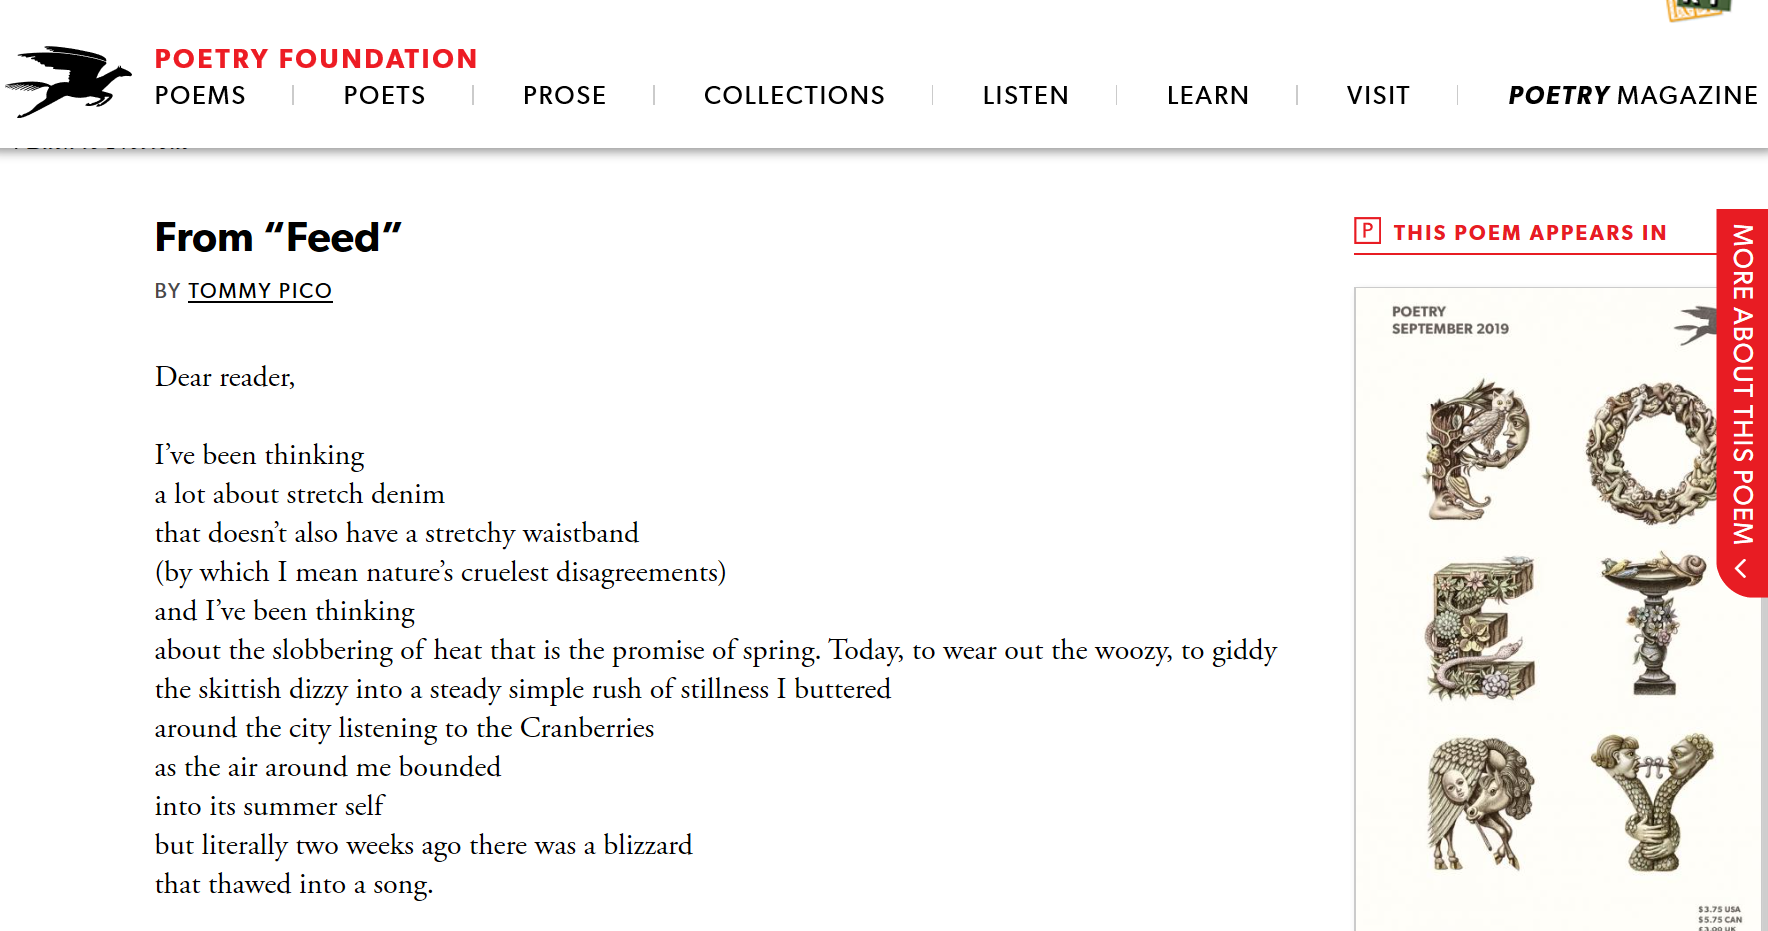 Screenshot of the preview of ‘Feed’ by Tommy Pico from the Poetry Foundation website